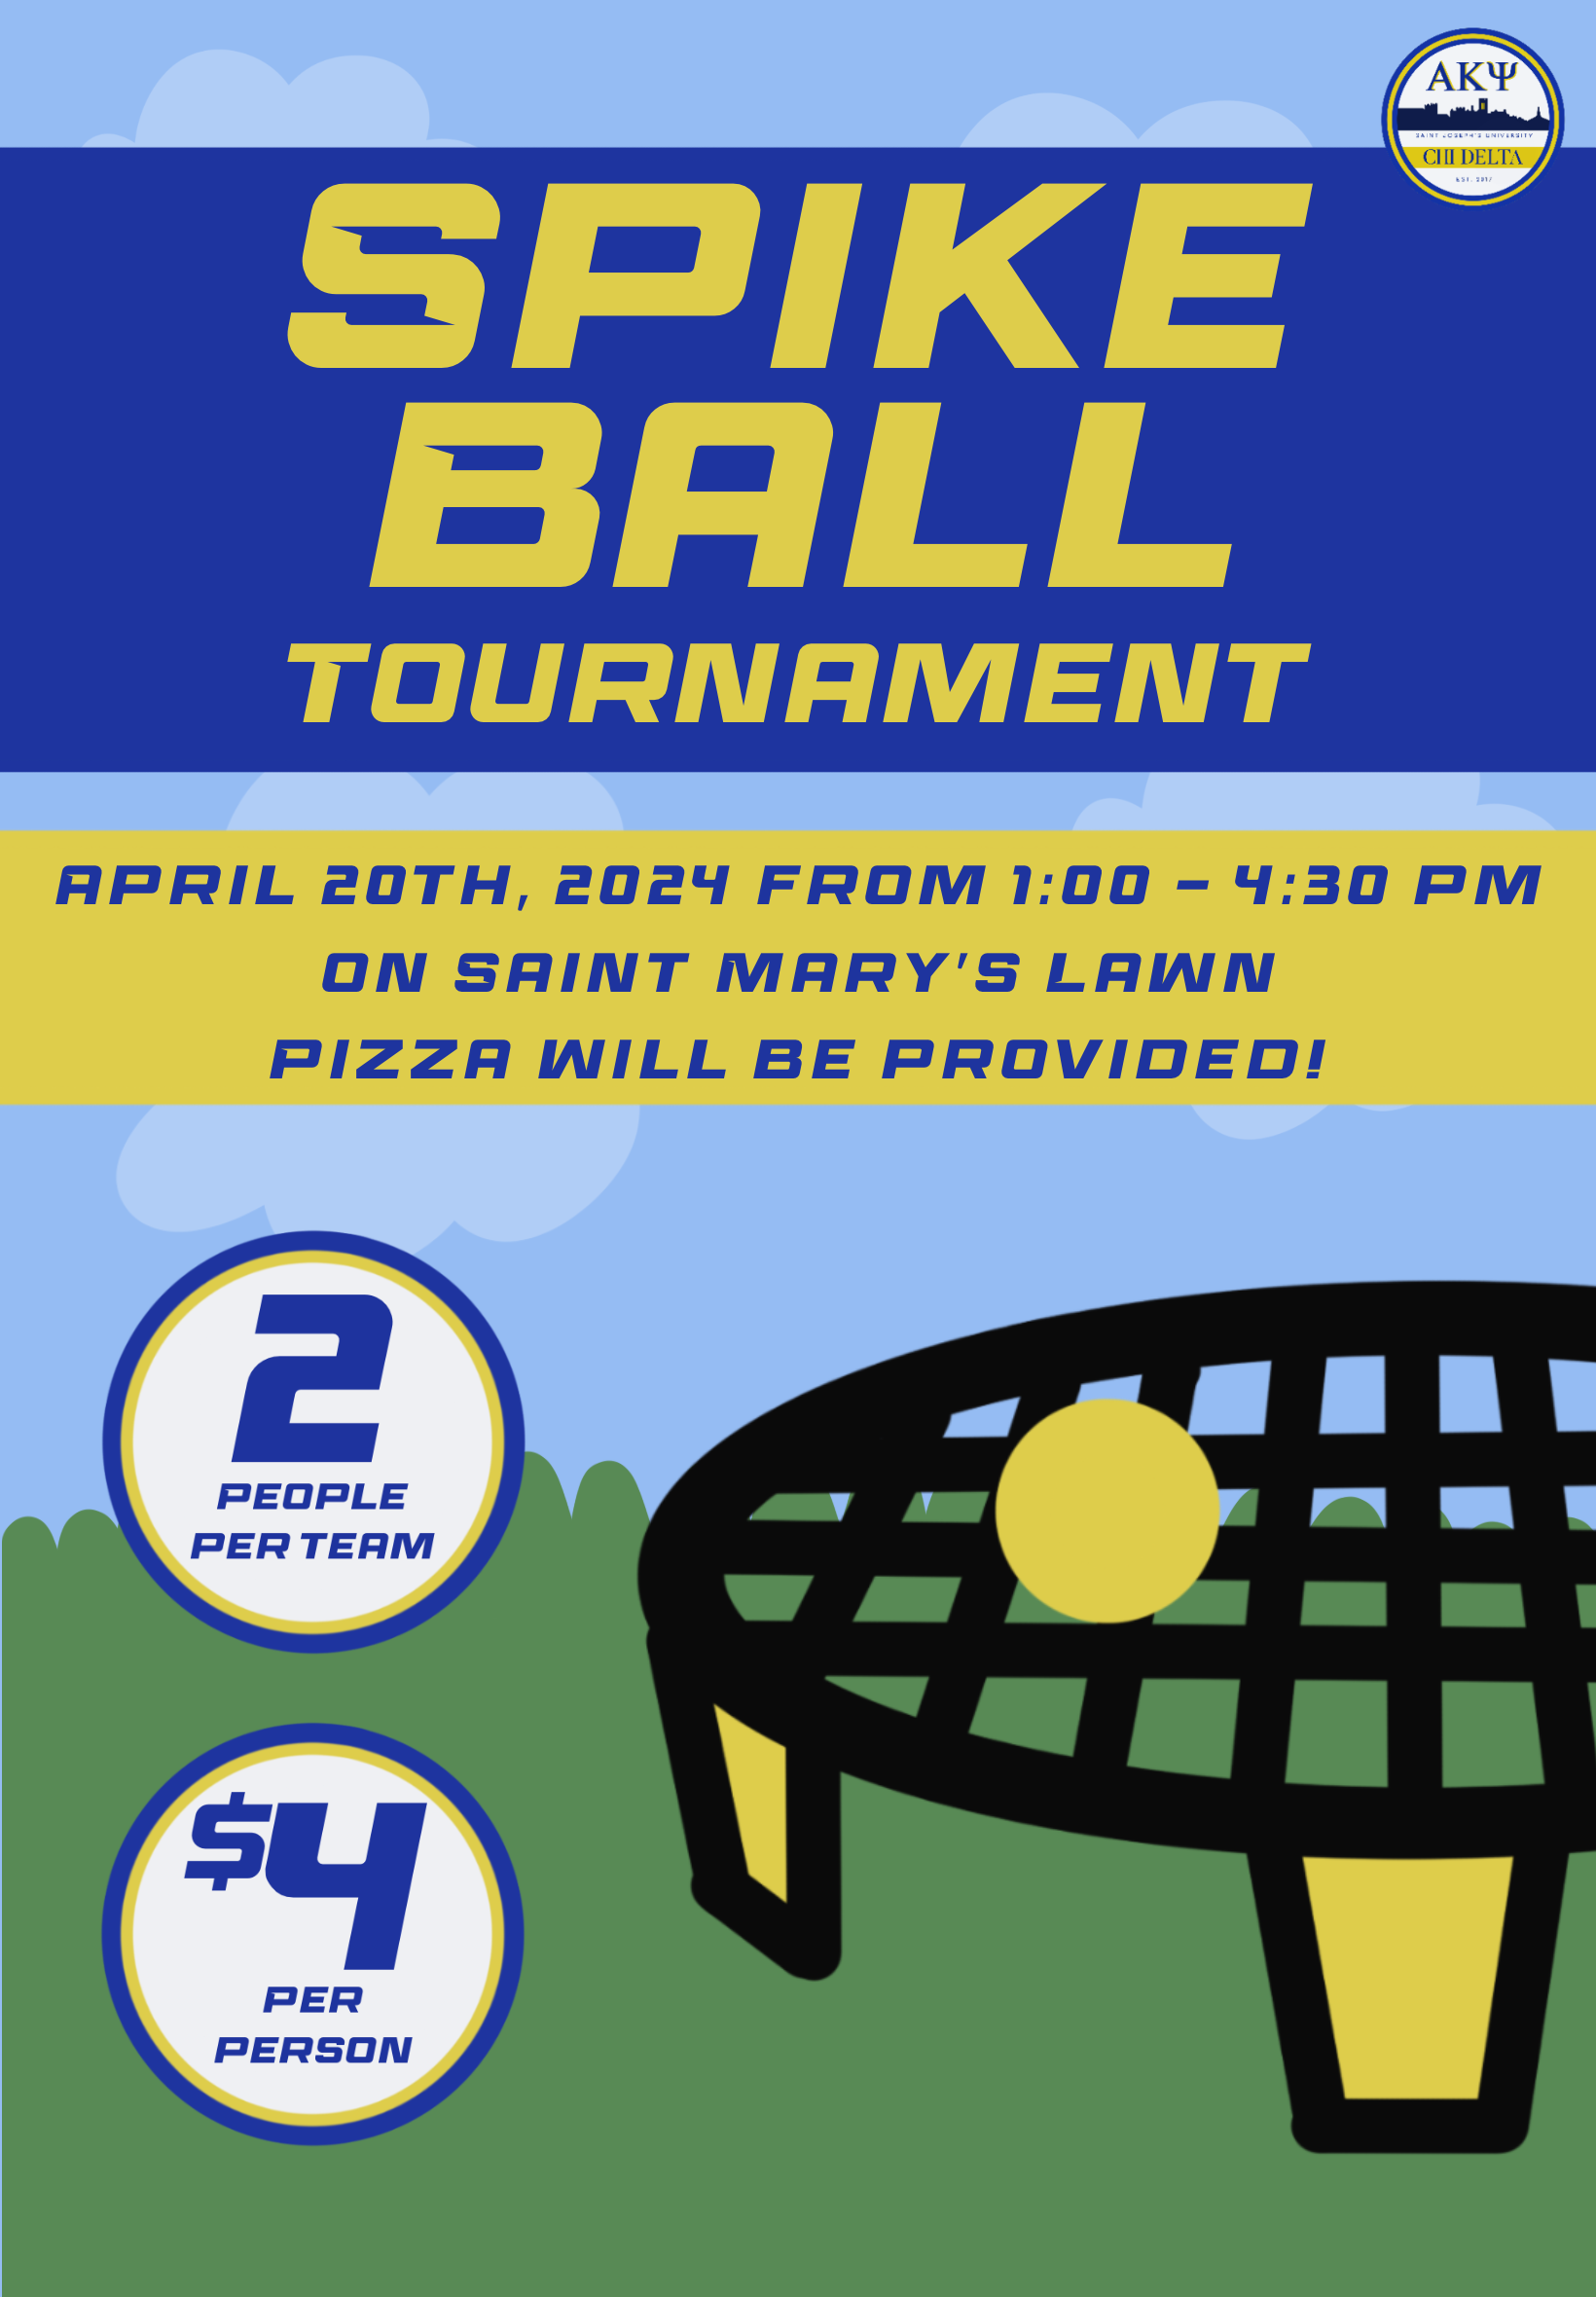 Spikeball flyer created by Cecilia Commero advertising a Spikeball Tournament fundraiser to support ASKPsi Chi Delta